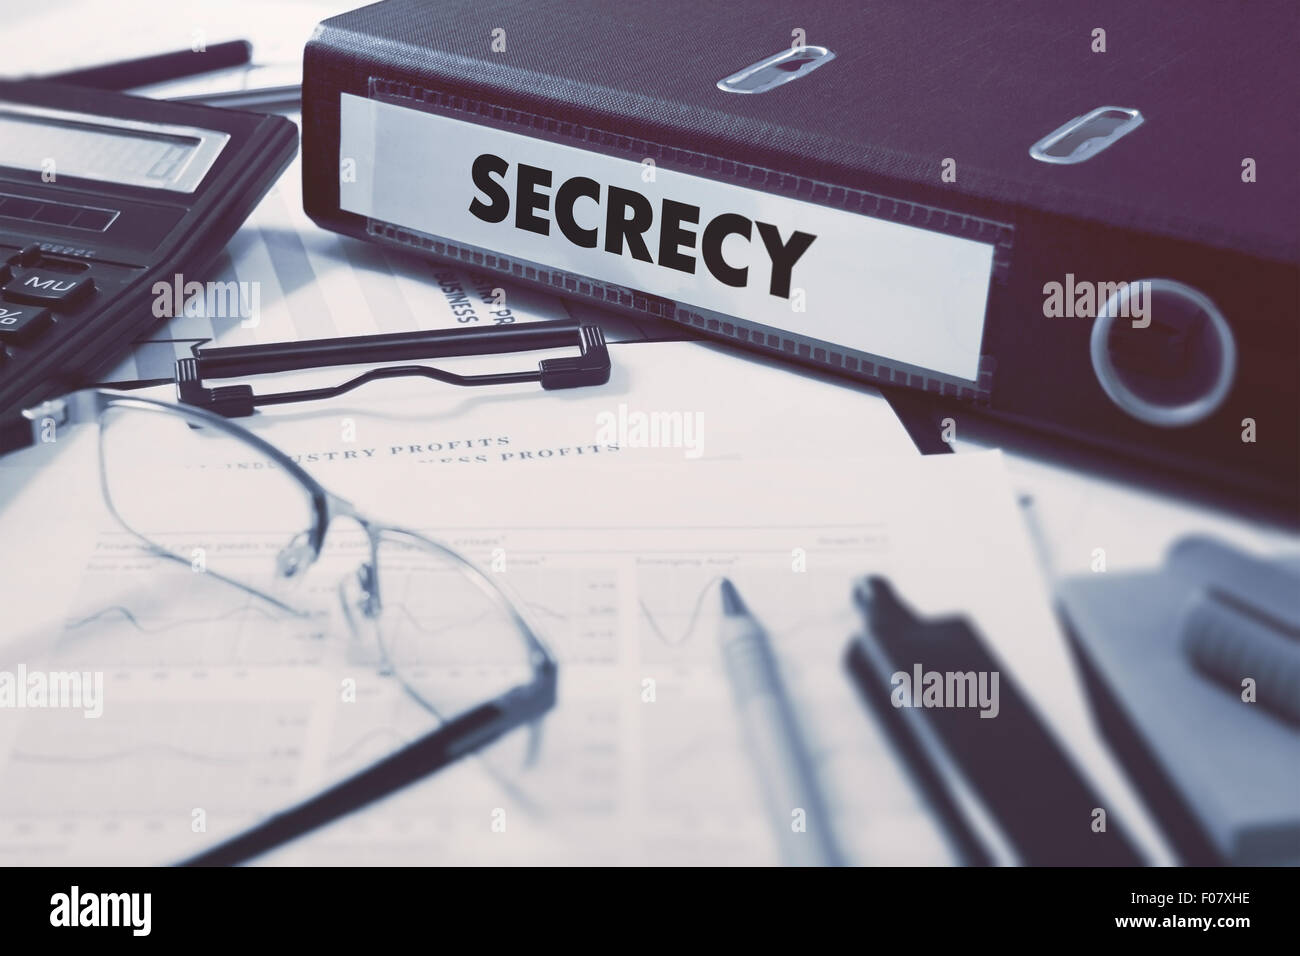 Secrecy on Ring Binder. Blured, Toned Image. Stock Photo